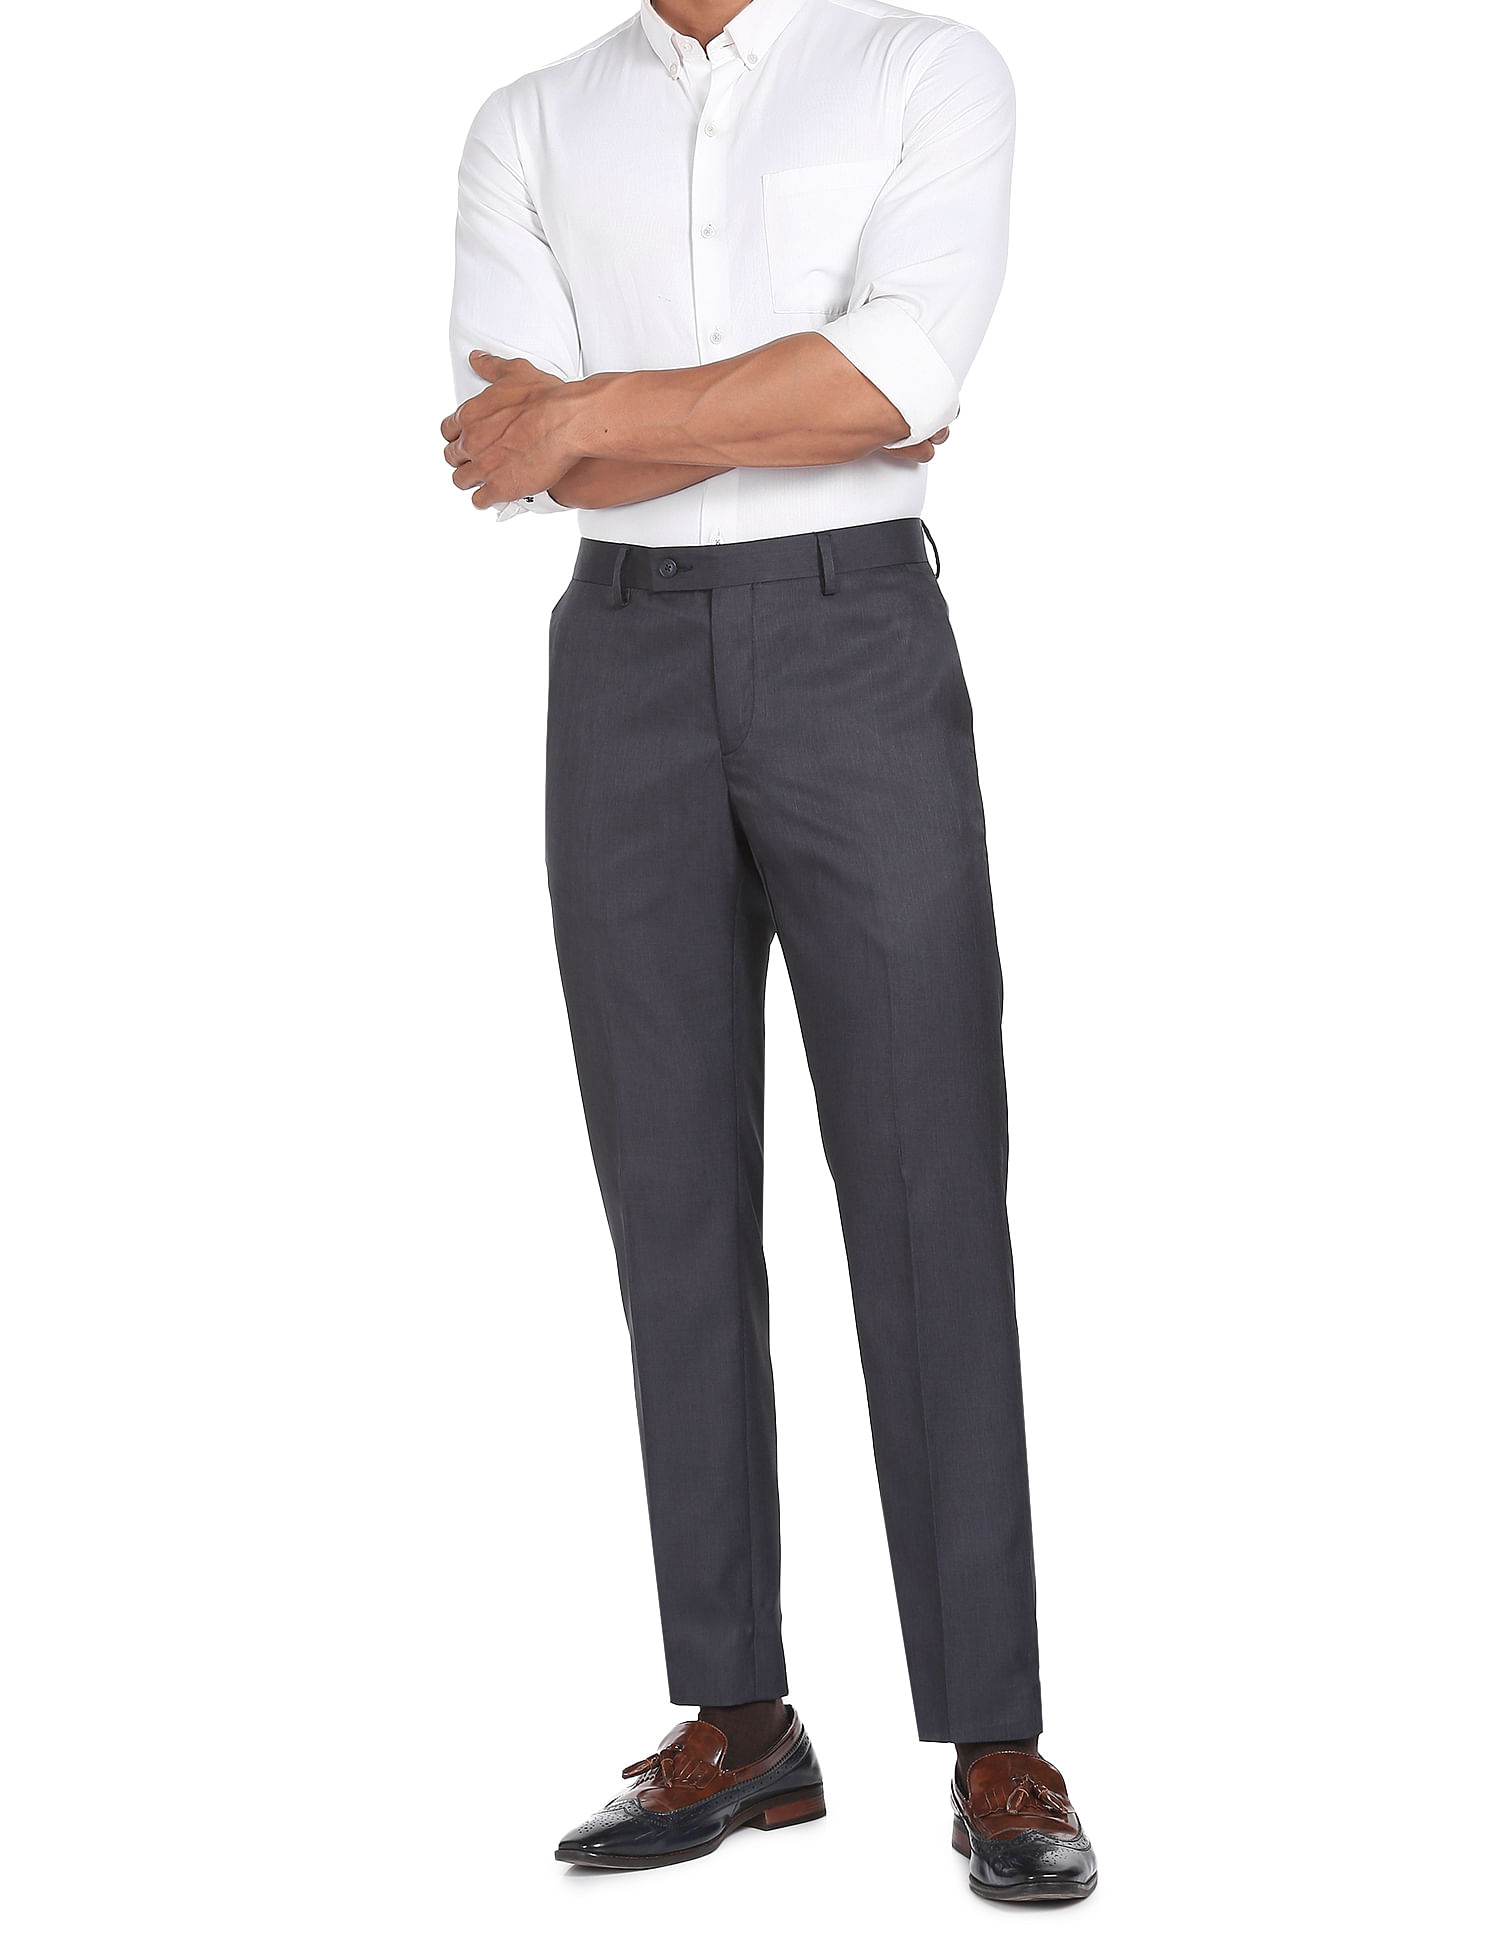 Buy Regular Fit Men Trousers Gray Beige and Blue Combo of 3 Polyester Blend  for Best Price Reviews Free Shipping